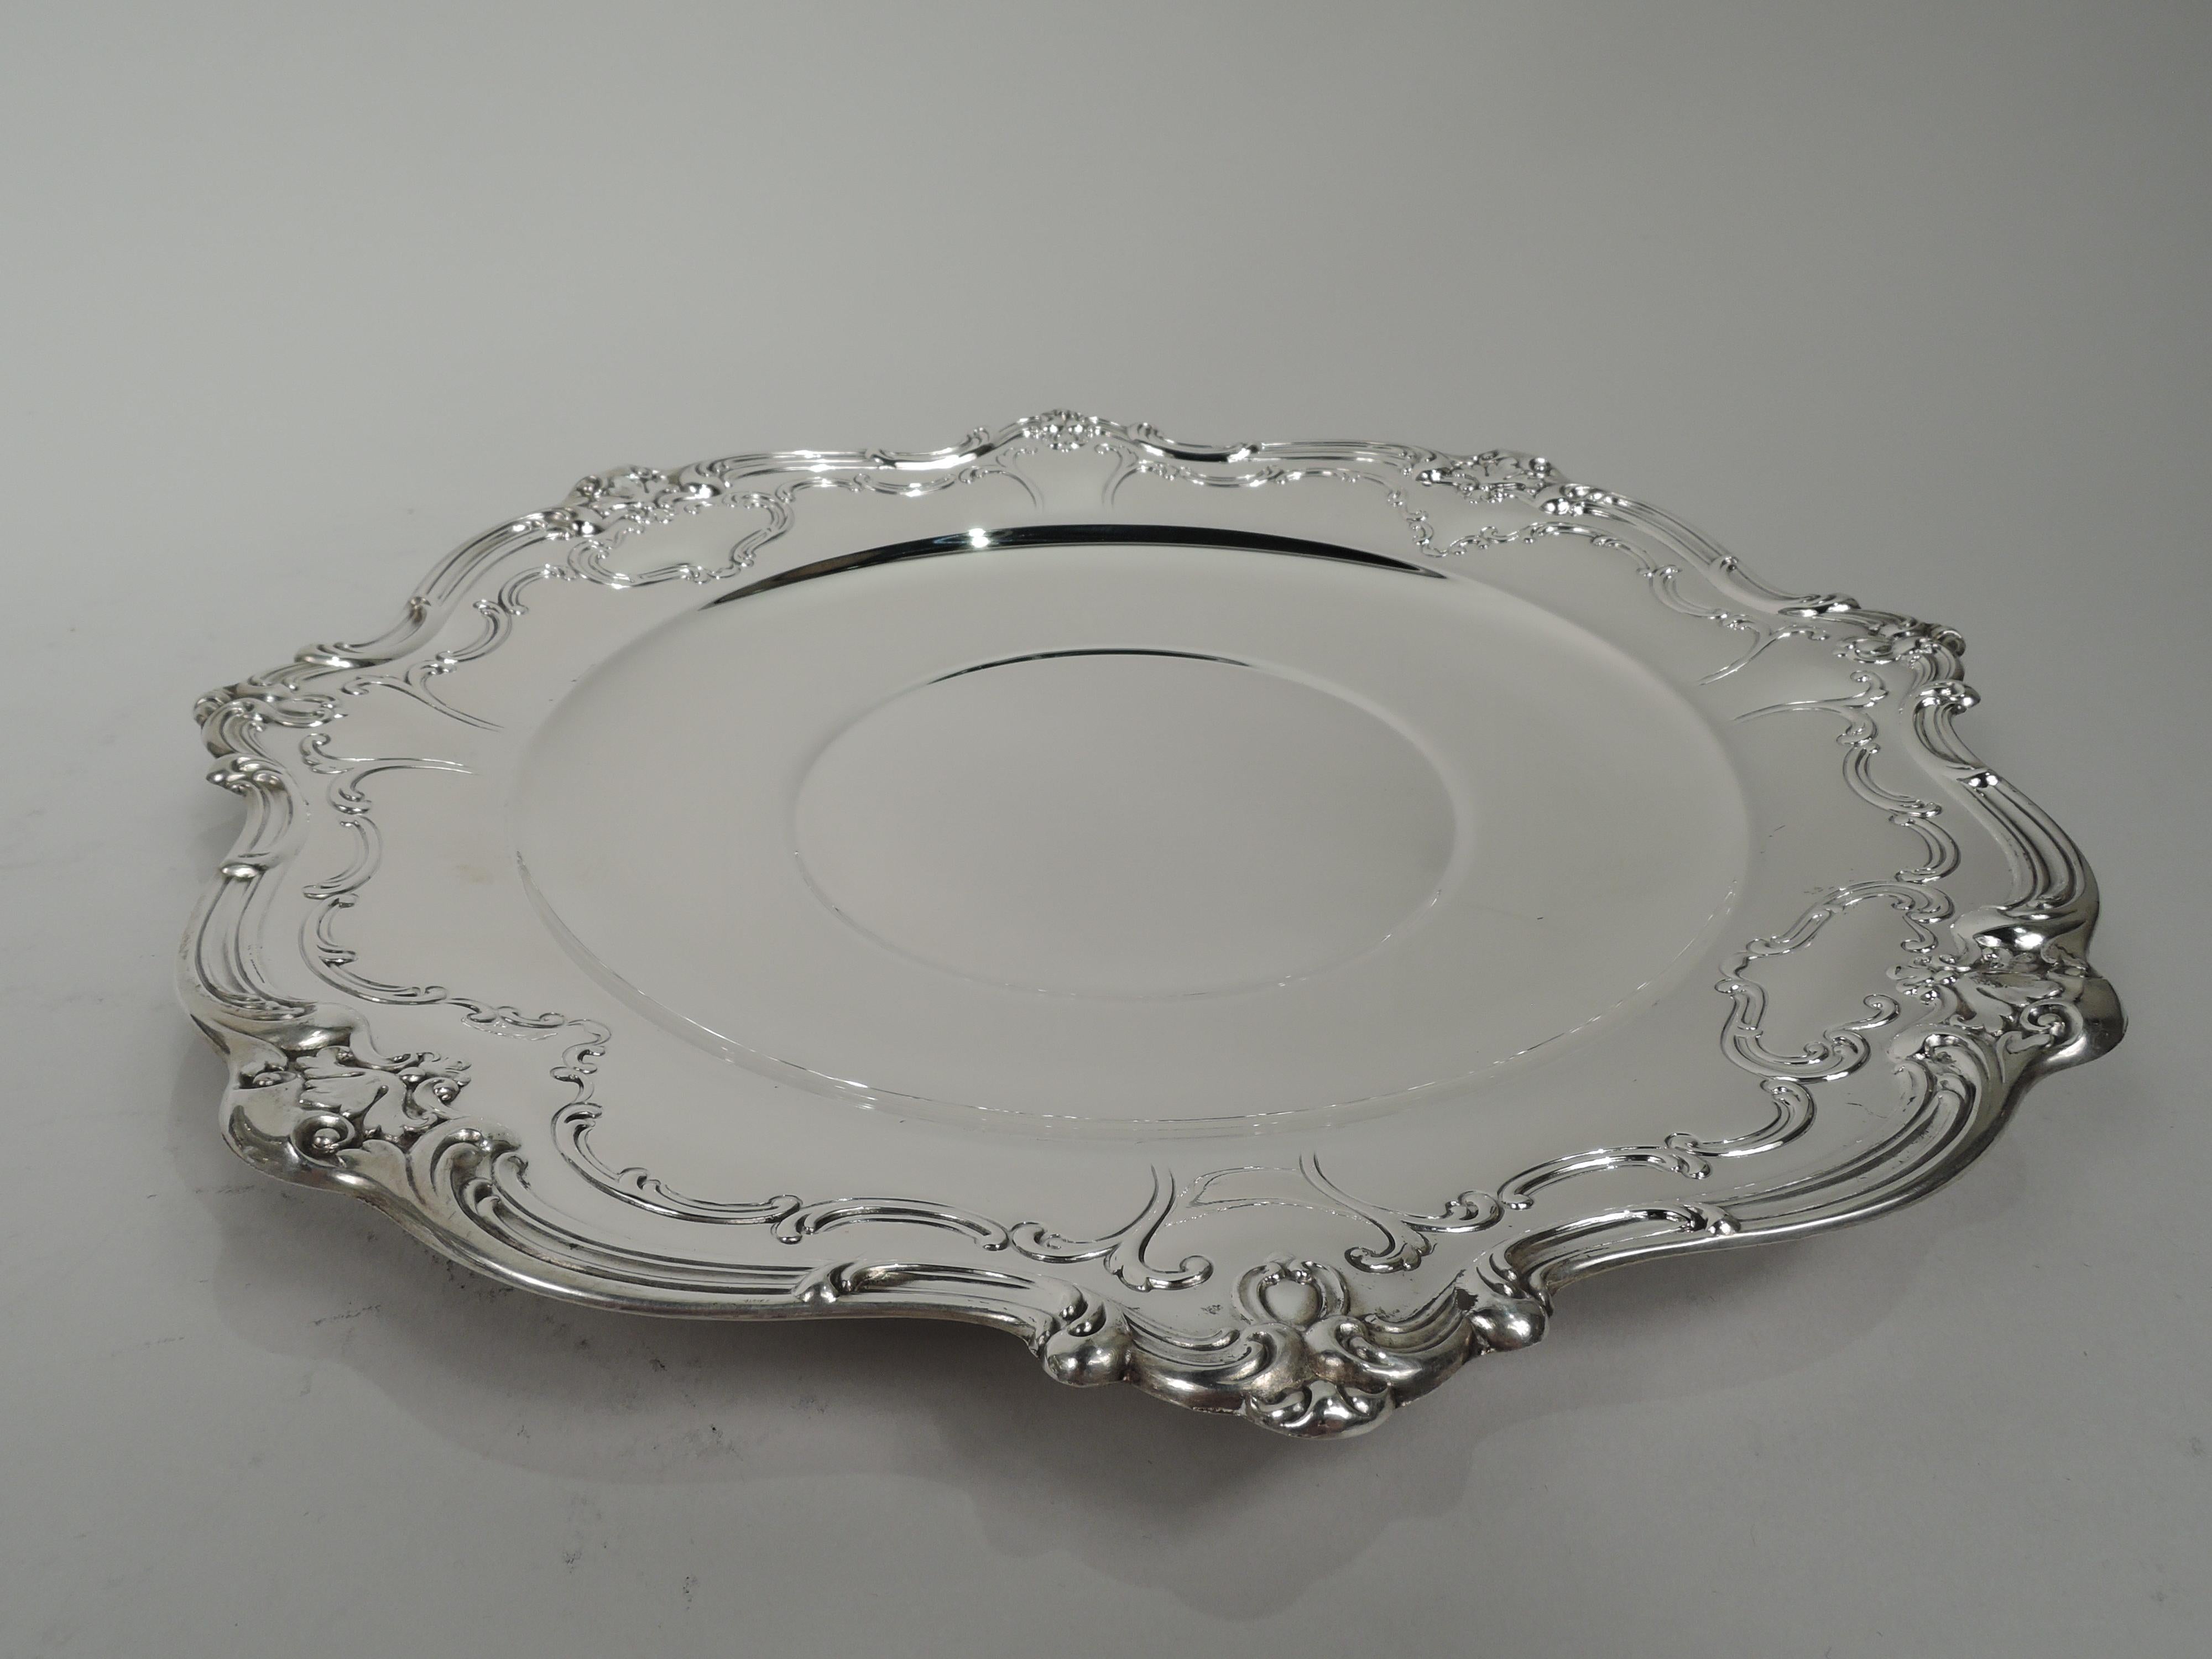 Chantilly-Duchess sterling silver cake plate. Made by Gorham in Providence in 1951. Round well, curved shoulder, and chased scrolled rim interspersed with leaves. A nice piece in the perennially popular late Victorian pattern. Fully marked including